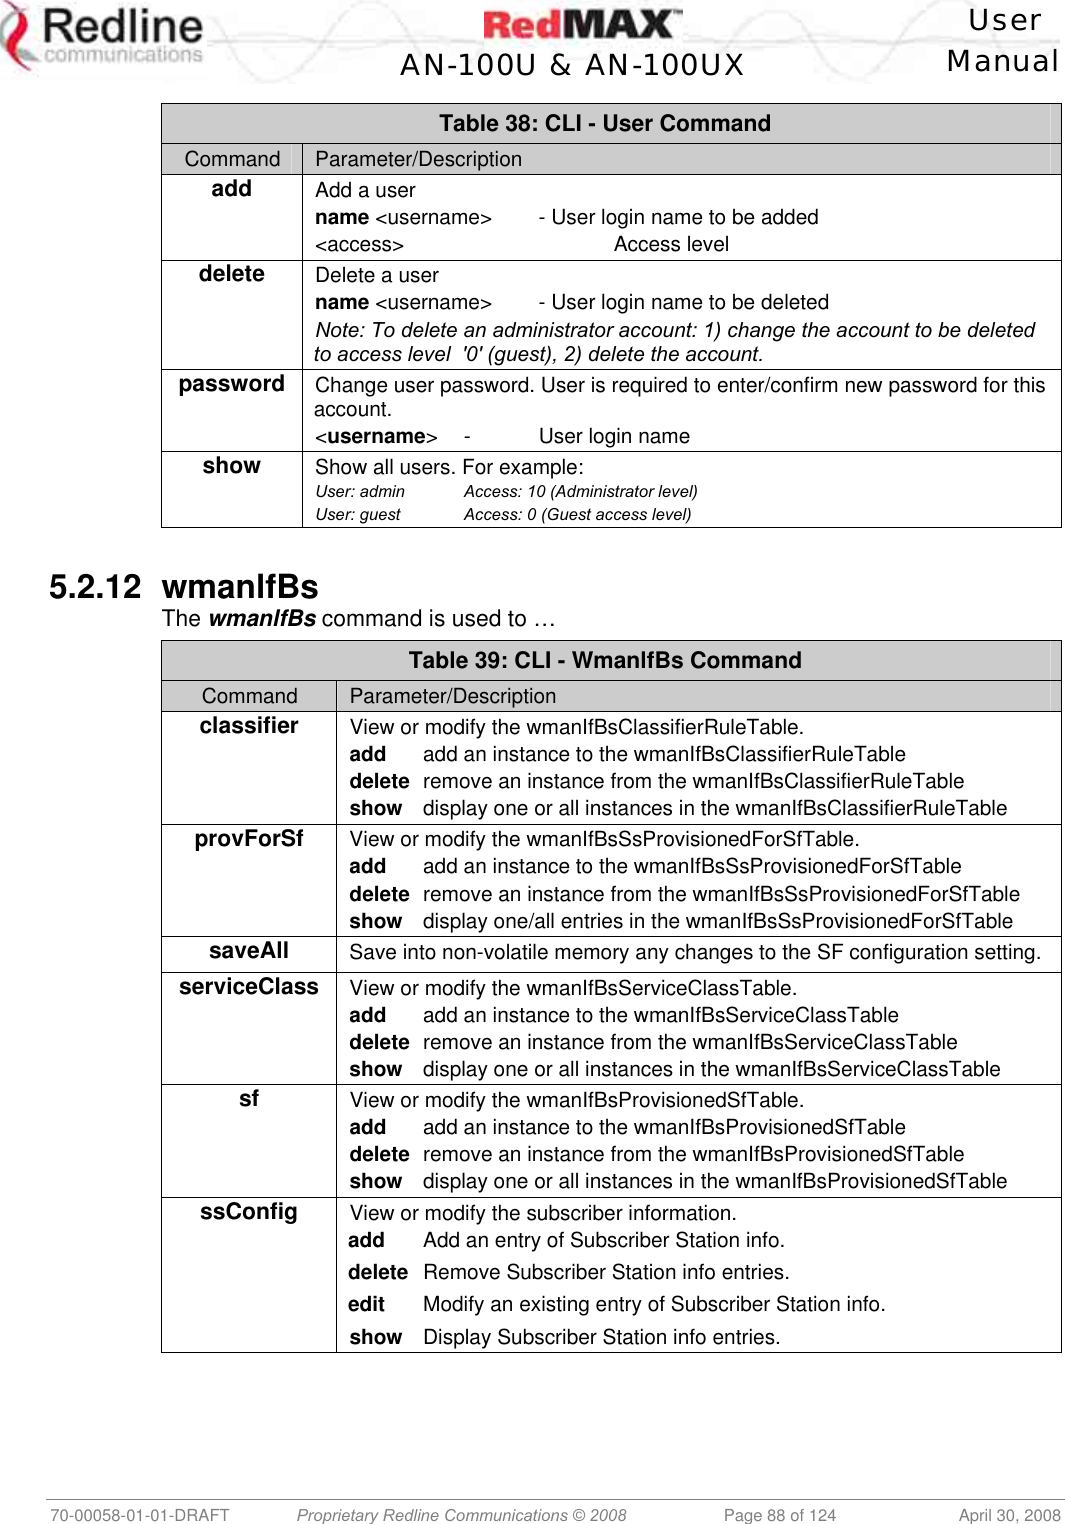    User  AN-100U &amp; AN-100UX Manual   70-00058-01-01-DRAFT  Proprietary Redline Communications © 2008   Page 88 of 124  April 30, 2008 Table 38: CLI - User Command Command  Parameter/Description add Add a user name &lt;username&gt;  - User login name to be added &lt;access&gt;   Access level delete Delete a user name &lt;username&gt;  - User login name to be deleted Note: To delete an administrator account: 1) change the account to be deleted to access level  &apos;0&apos; (guest), 2) delete the account. password Change user password. User is required to enter/confirm new password for this account. &lt;username&gt;  -   User login name show Show all users. For example: User: admin  Access: 10 (Administrator level) User: guest  Access: 0 (Guest access level)  5.2.12 wmanlfBs The wmanlfBs command is used to … Table 39: CLI - WmanlfBs Command Command  Parameter/Description classifier View or modify the wmanIfBsClassifierRuleTable. add  add an instance to the wmanIfBsClassifierRuleTable delete  remove an instance from the wmanIfBsClassifierRuleTable show  display one or all instances in the wmanIfBsClassifierRuleTable provForSf View or modify the wmanIfBsSsProvisionedForSfTable. add  add an instance to the wmanIfBsSsProvisionedForSfTable delete  remove an instance from the wmanIfBsSsProvisionedForSfTable show  display one/all entries in the wmanIfBsSsProvisionedForSfTable saveAll Save into non-volatile memory any changes to the SF configuration setting. serviceClass View or modify the wmanIfBsServiceClassTable. add  add an instance to the wmanIfBsServiceClassTable delete  remove an instance from the wmanIfBsServiceClassTable show  display one or all instances in the wmanIfBsServiceClassTable sf View or modify the wmanIfBsProvisionedSfTable. add  add an instance to the wmanIfBsProvisionedSfTable delete  remove an instance from the wmanIfBsProvisionedSfTable show  display one or all instances in the wmanIfBsProvisionedSfTable ssConfig View or modify the subscriber information.   add  Add an entry of Subscriber Station info. delete  Remove Subscriber Station info entries. edit  Modify an existing entry of Subscriber Station info. show  Display Subscriber Station info entries.  